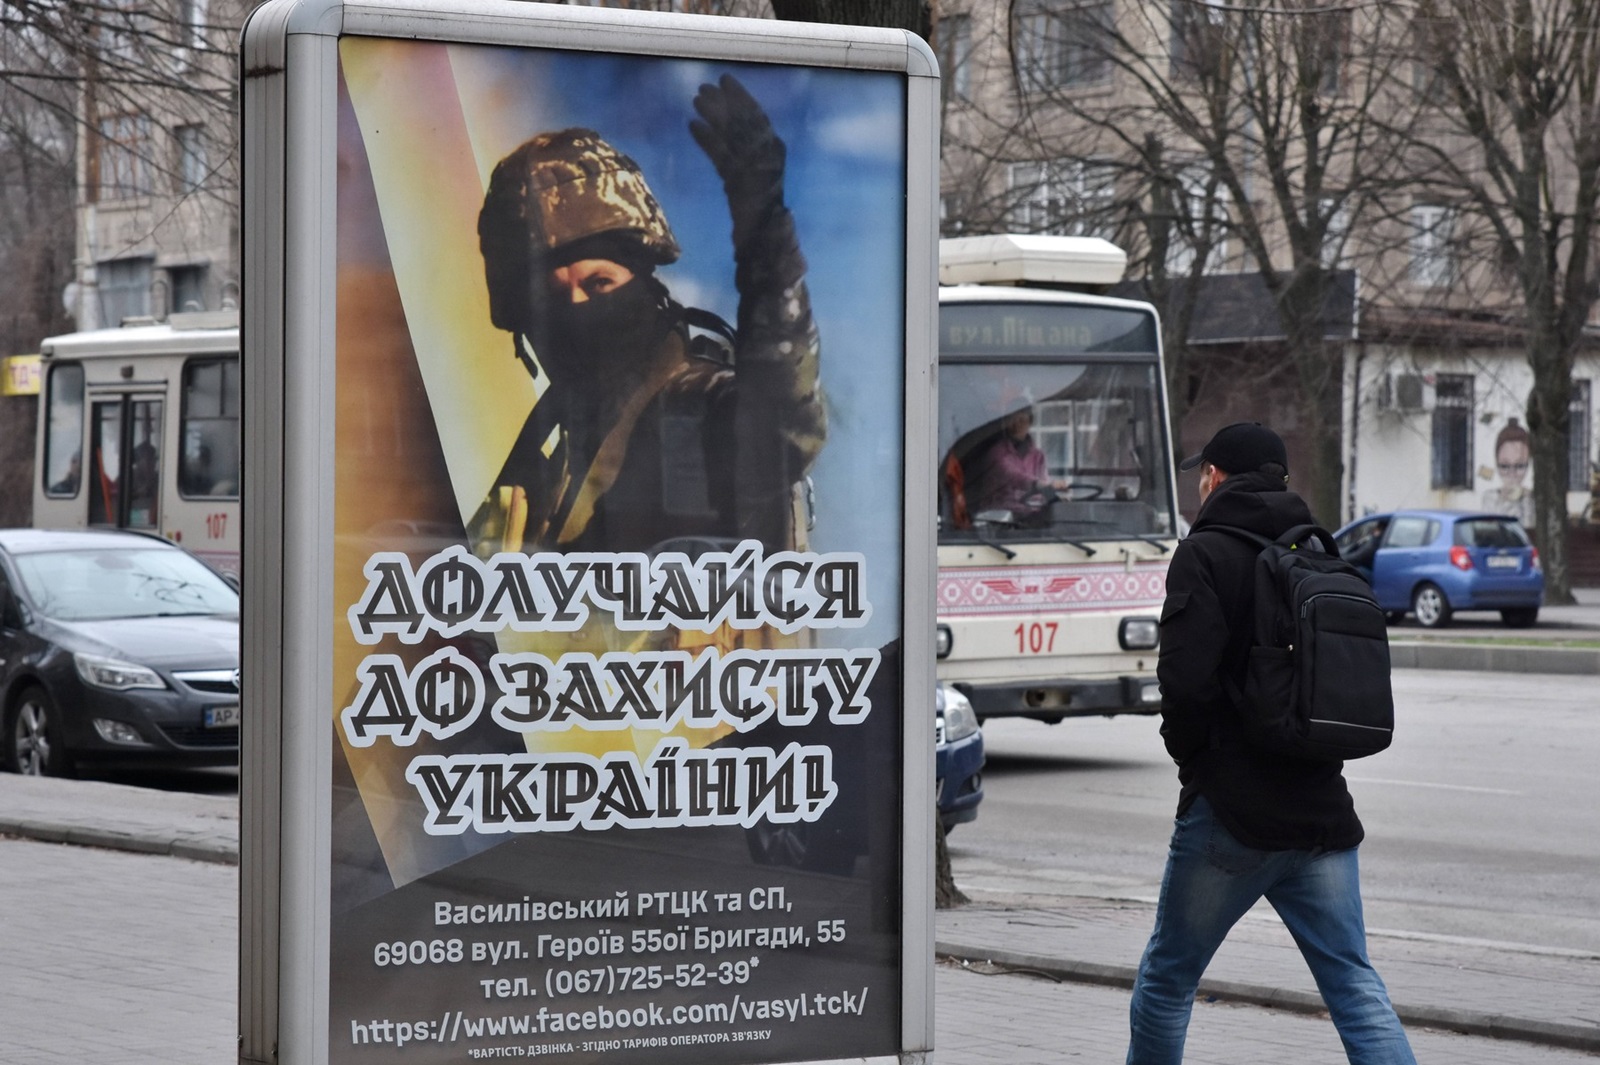 A man walks past the recruitment poster for the Ukrainian armed forces in the center of Zaporizhzhia. When Russia launched its full-scale invasion in 2022, many Ukrainians volunteered to defend their country. But that pool has been exhausted and a large proportion of the men of fighting age are unwilling to be deployed to the front. Only men aged 27 or older have been recruited, with those serving on the battlefield being on average in their 40s. A new mobilisation law â€” due to be put to a parliamentary vote on March 31 â€” seeks to update the countryâ€™s legal framework ahead of a probable recruitment wave this year in which up to 500,000 people could be drafted. - Andriy Andriyenko / SOPA Images//SOPAIMAGES_08480043/Credit:SOPA Images/SIPA/2403210919,Image: 858451341, License: Rights-managed, Restrictions: , Model Release: no, Credit line: SOPA Images / Sipa Press / Profimedia